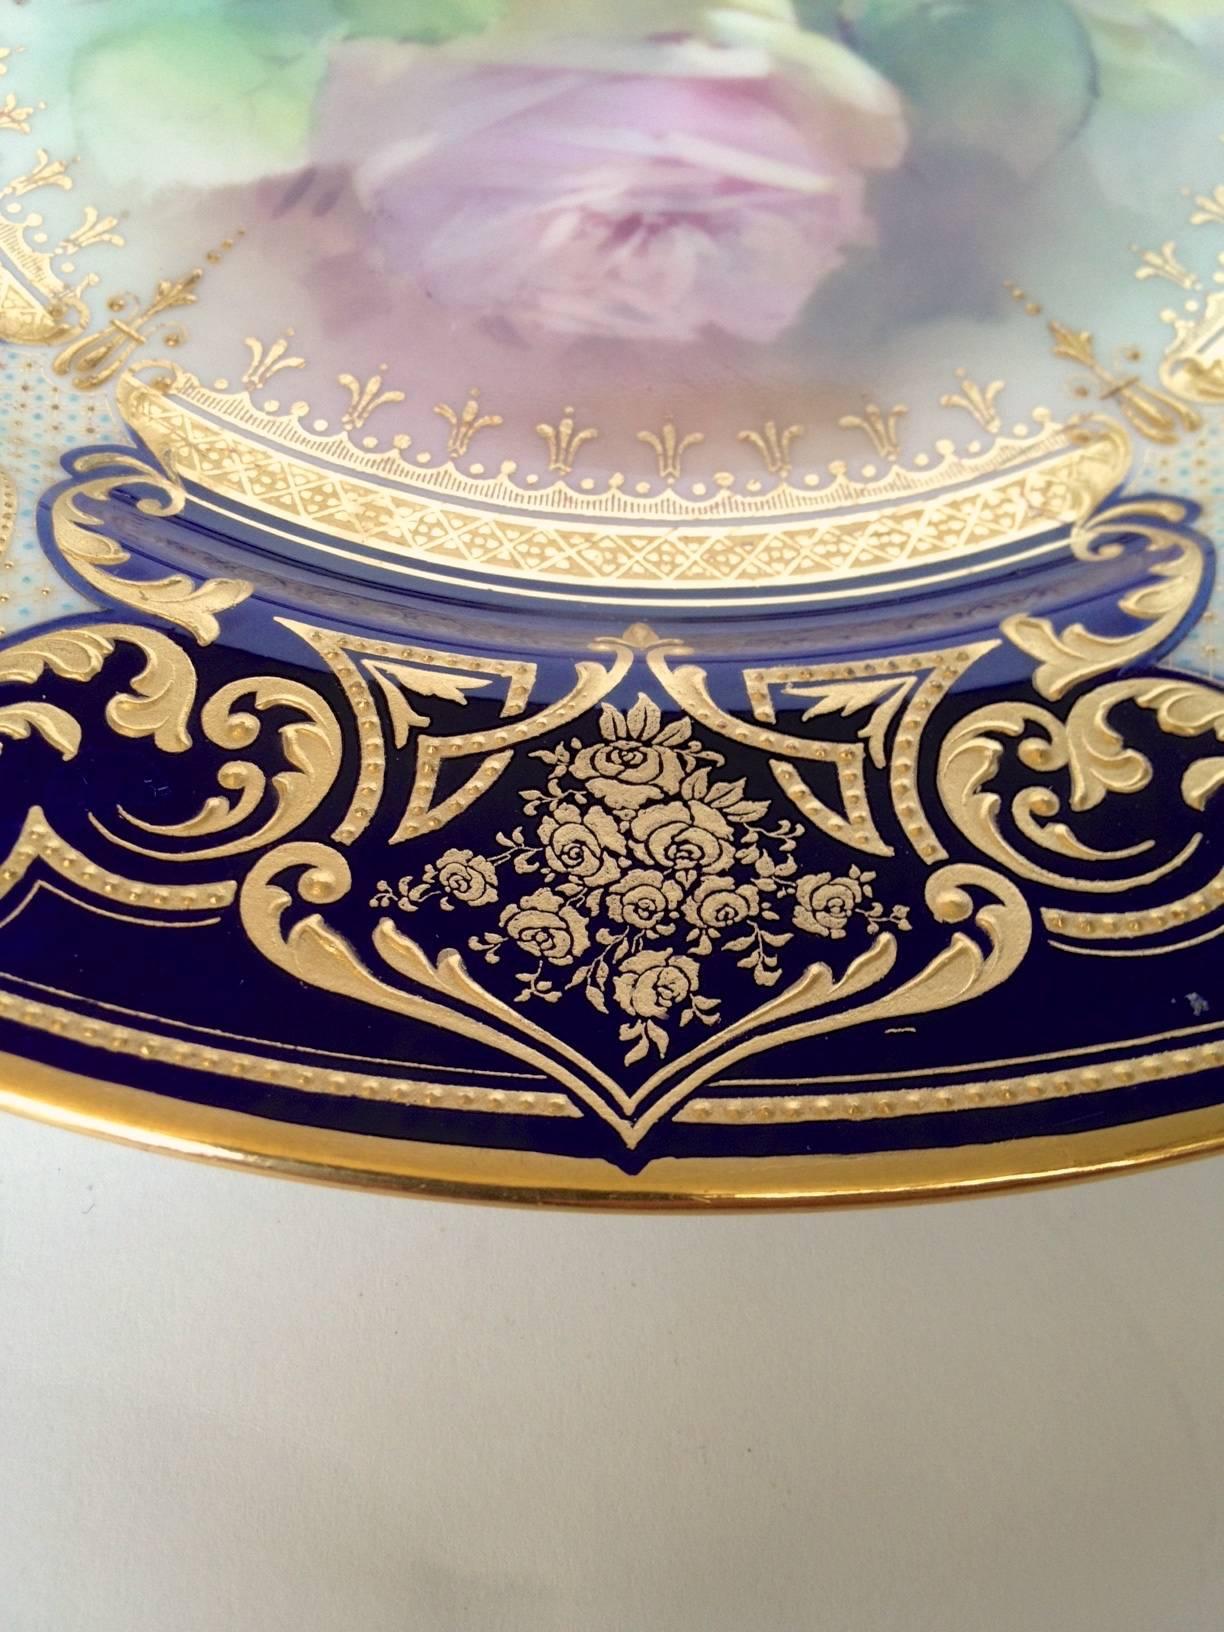 Gorgeous pair of English hand-painted and raised paste gilt cabinet plates expertly hand-painted by W. Slater for Royal Doulton you can almost smell the large roses yellow and pink so nice for decoration or a special dinner for two as the service